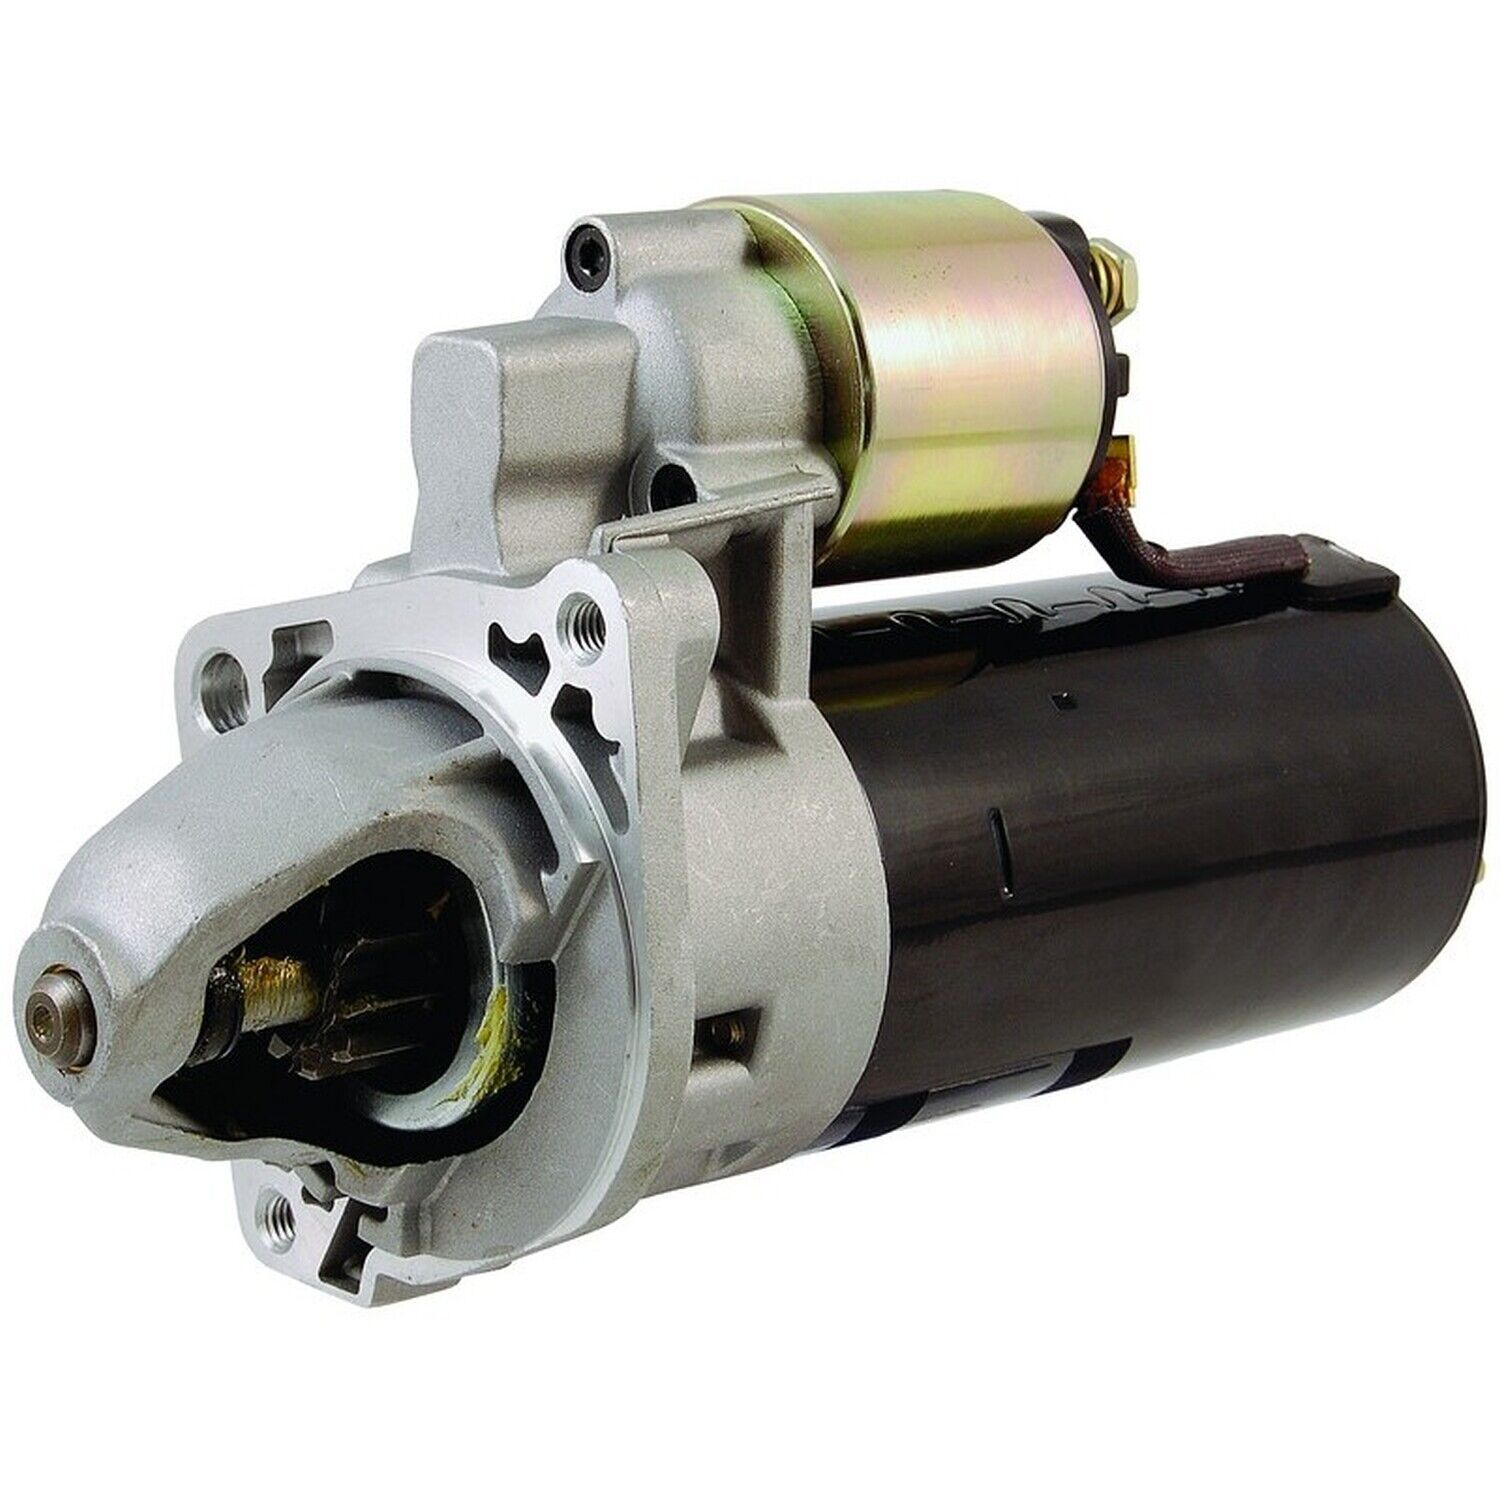 New Starter For Fiat Uno 87-94 9-141-385 063112003010 063223332010 063521101250